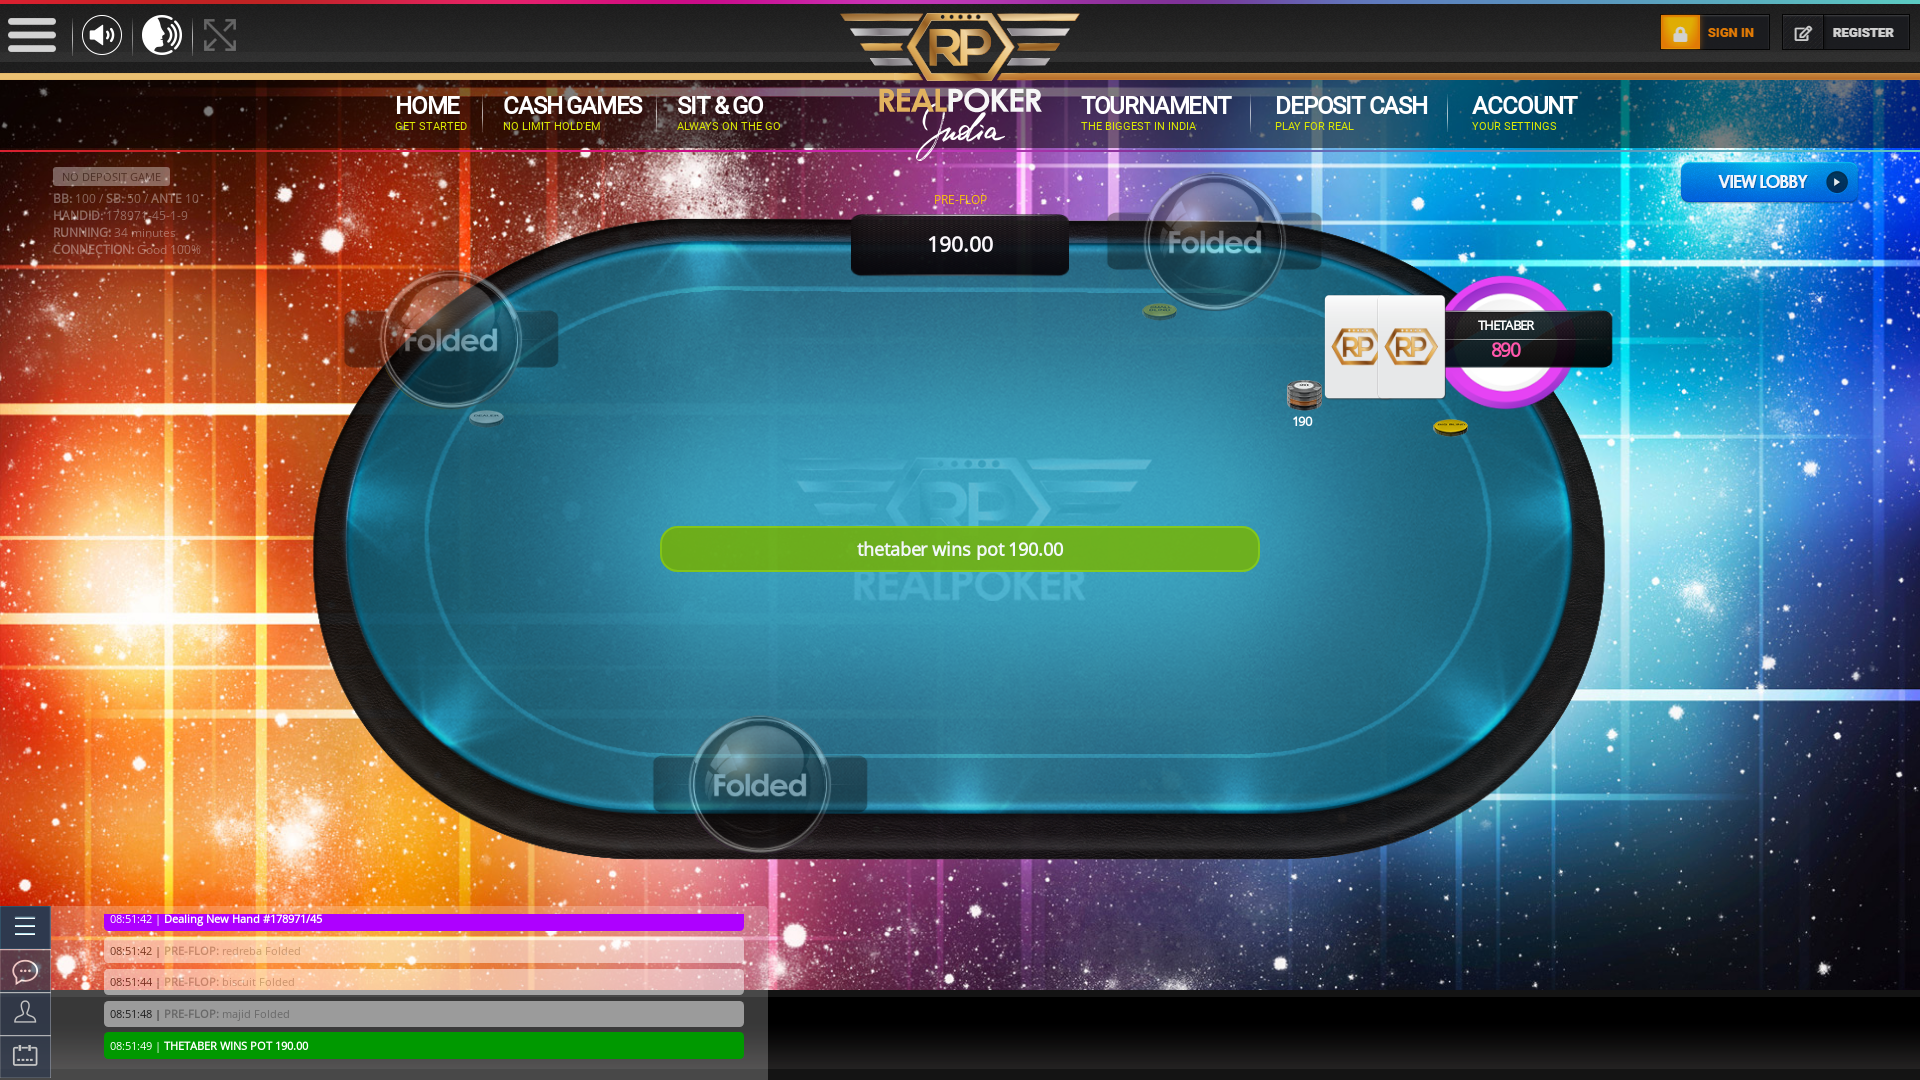 10 player texas holdem table at real poker with the table id 178971